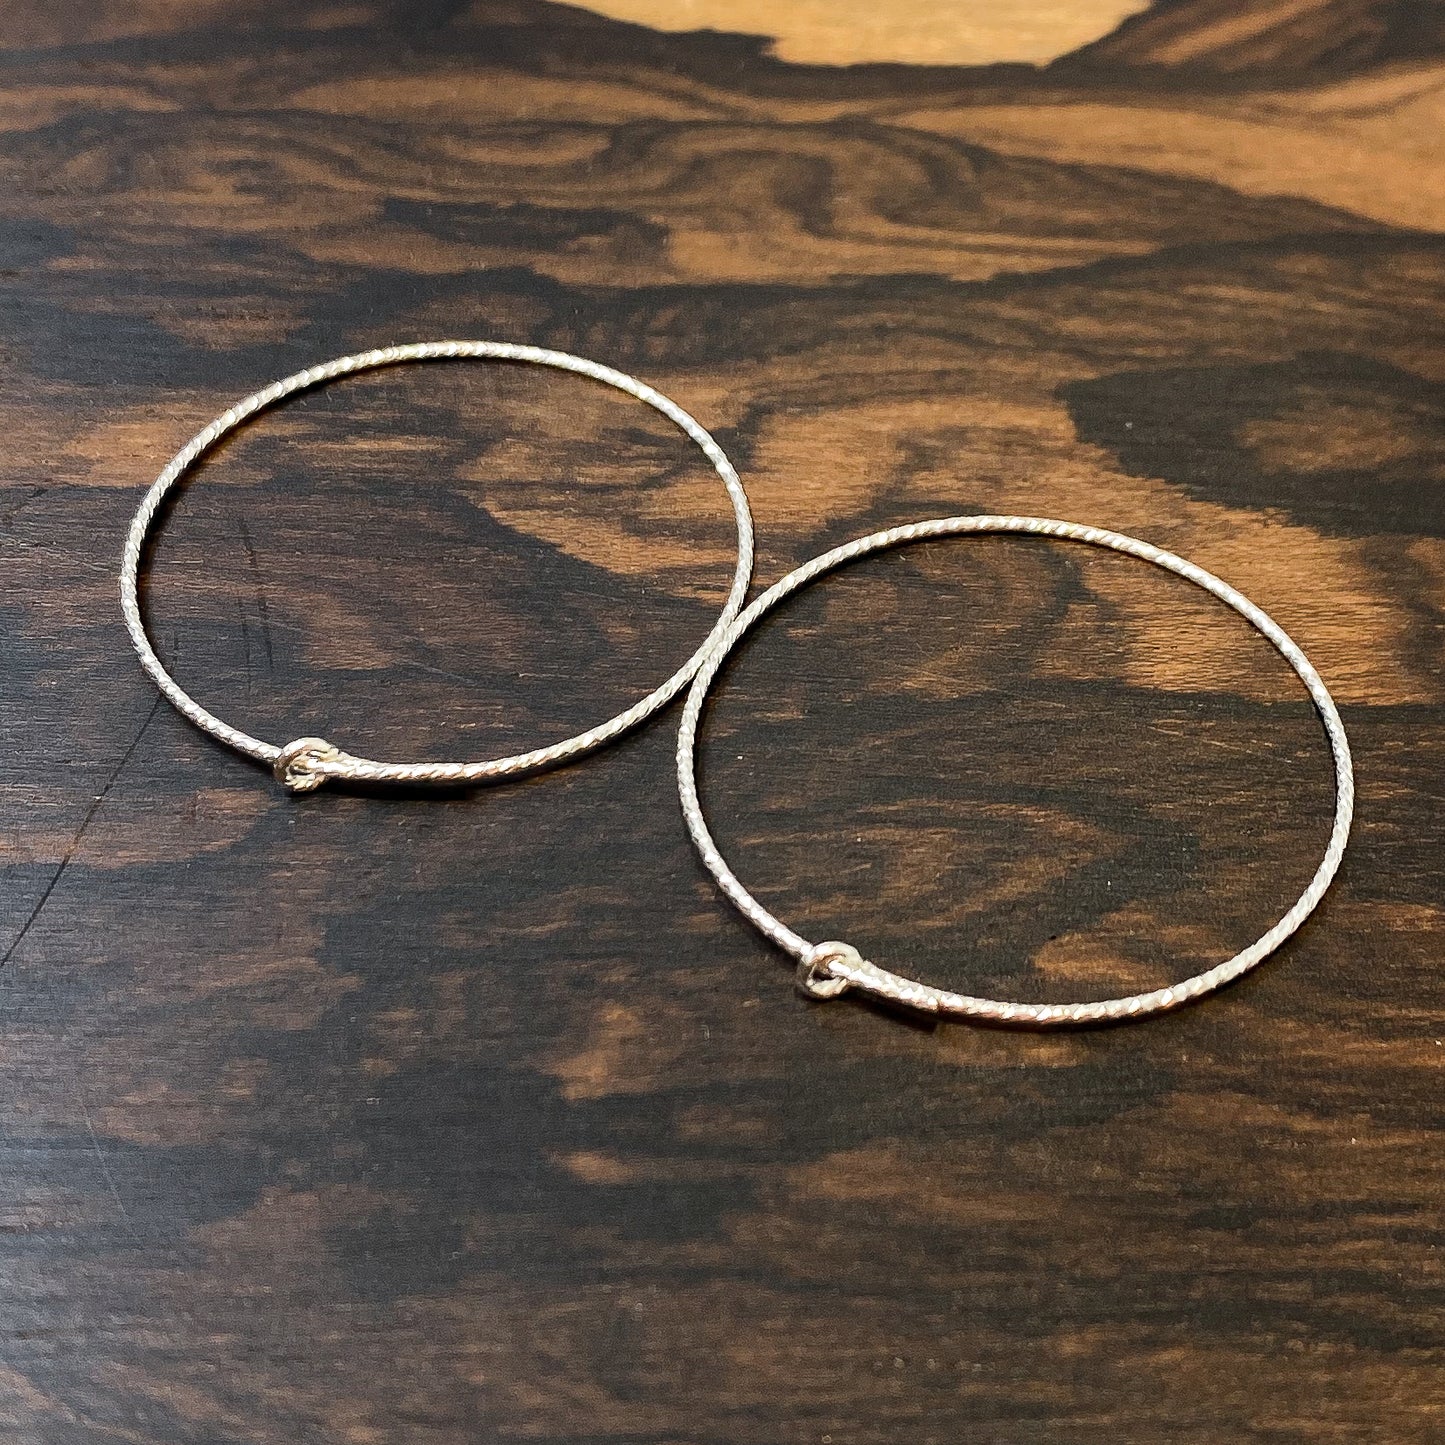 28mm Sparkle Hoop Earring (3 Metal Options Available) - 1 pair